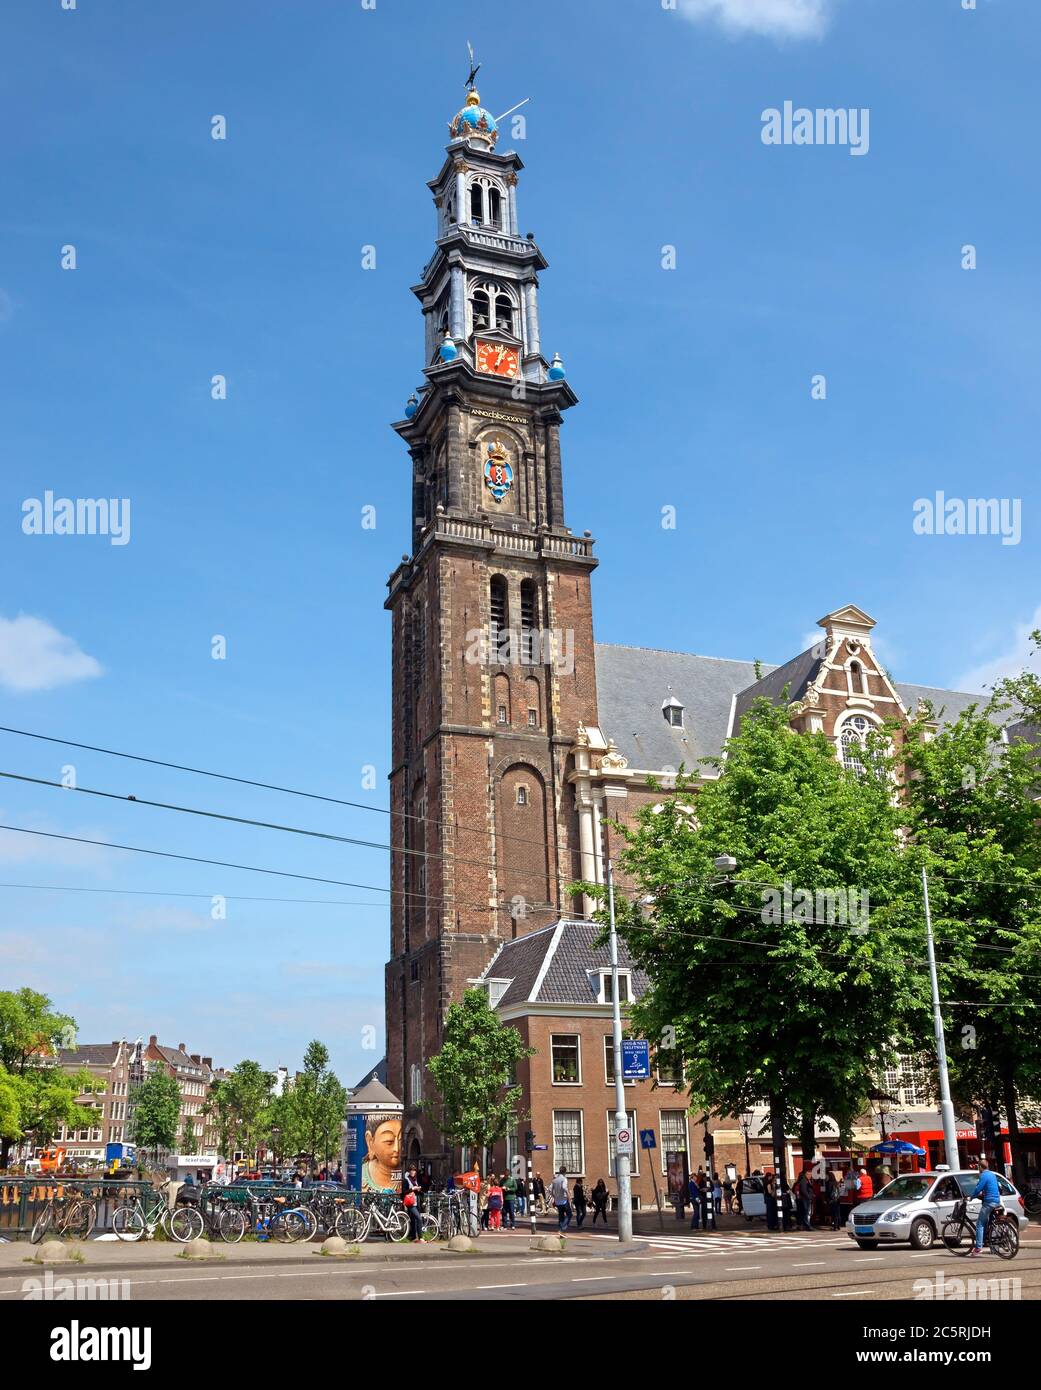 AMSTERDAM, NETHERLANDS - MAY 30: Bell tower of the Westerkerk on May 30, 2014 in Amsterdam, Netherlands. Built in 1637 and designed by the famous Dutc Stock Photo